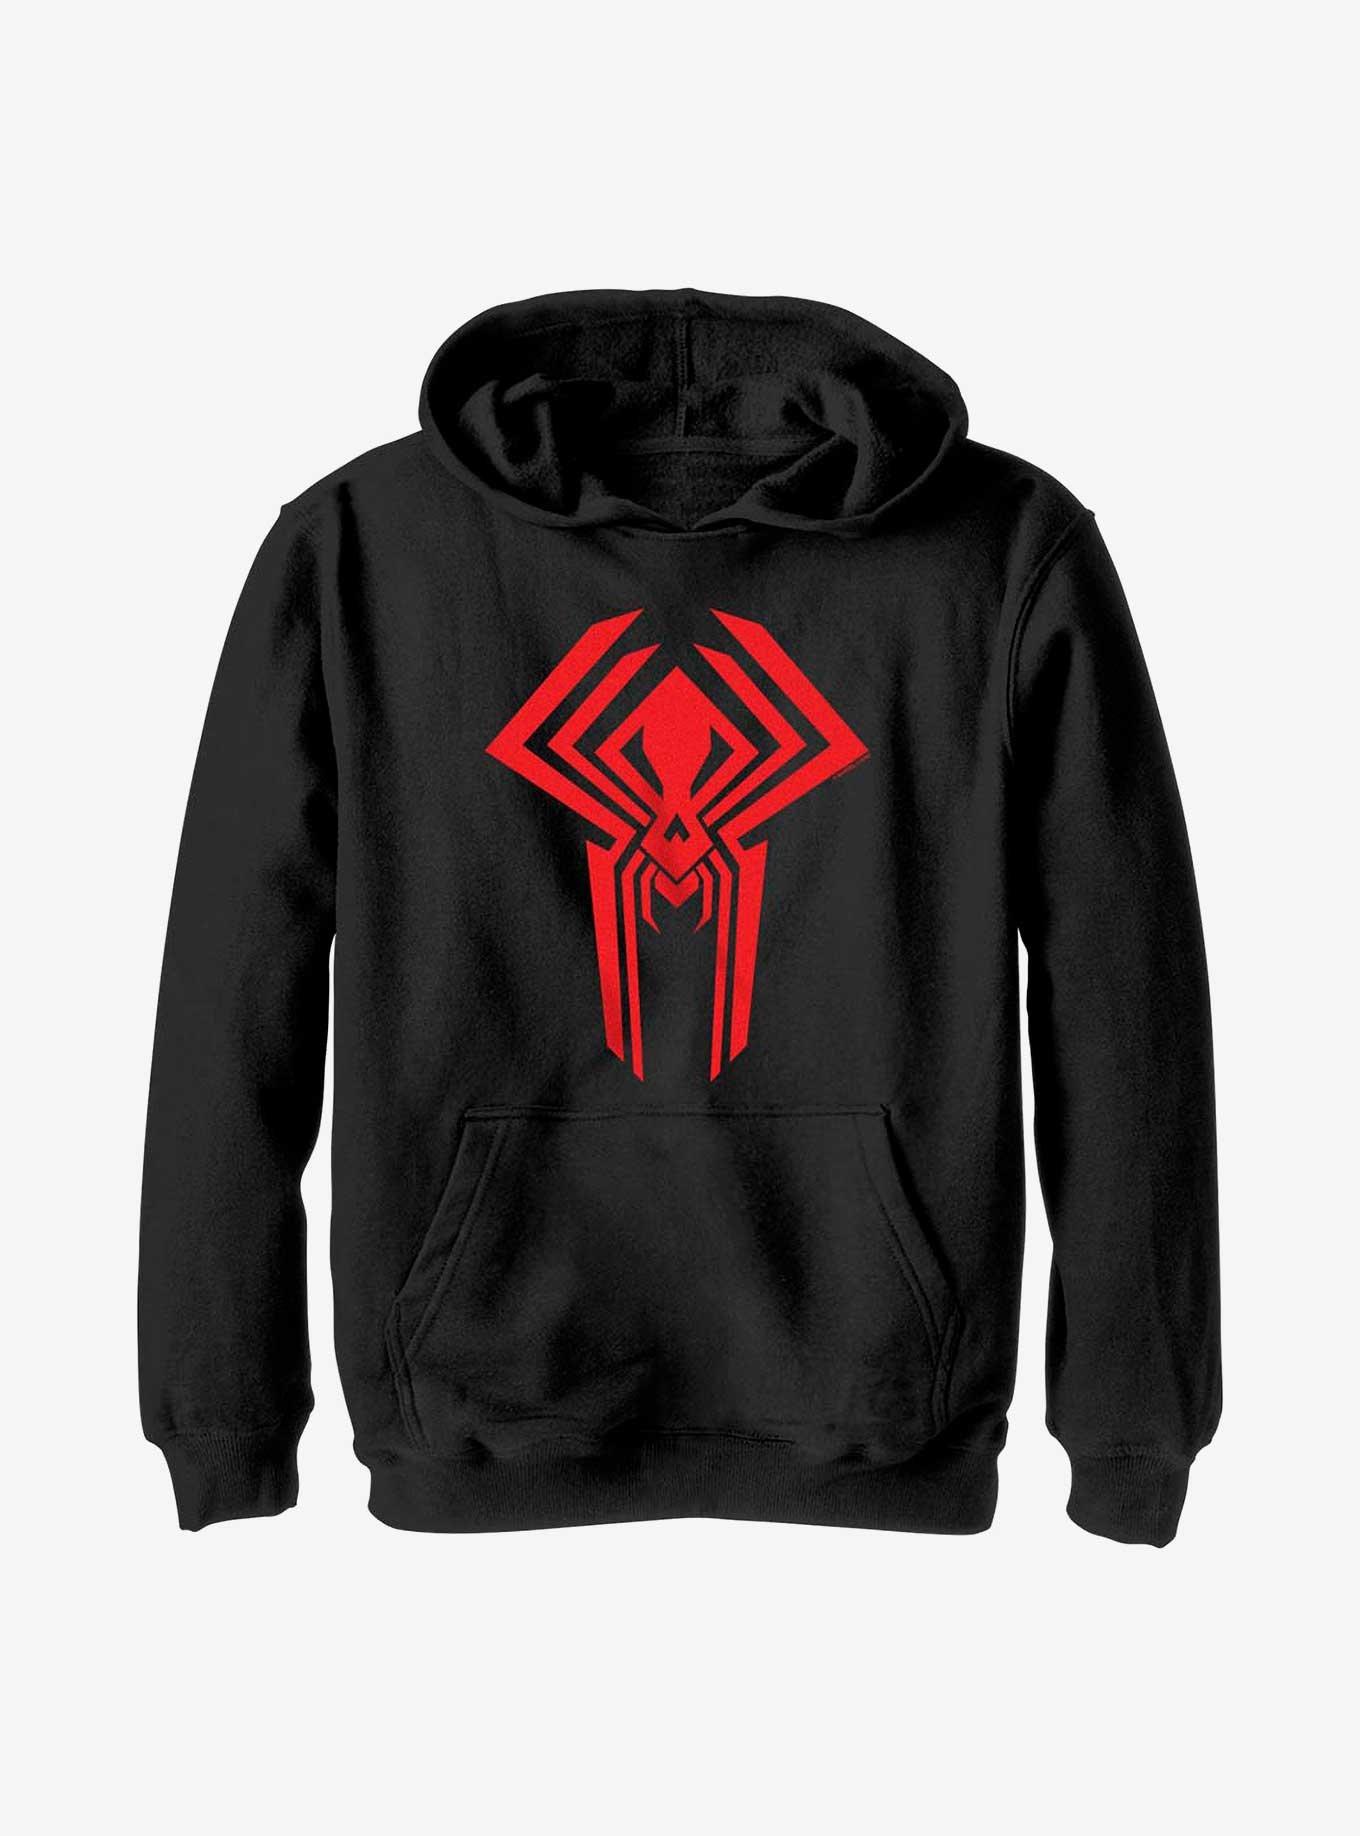 Men's Marvel Spider-Man: No Way Home The Man Pull Over Hoodie White Small